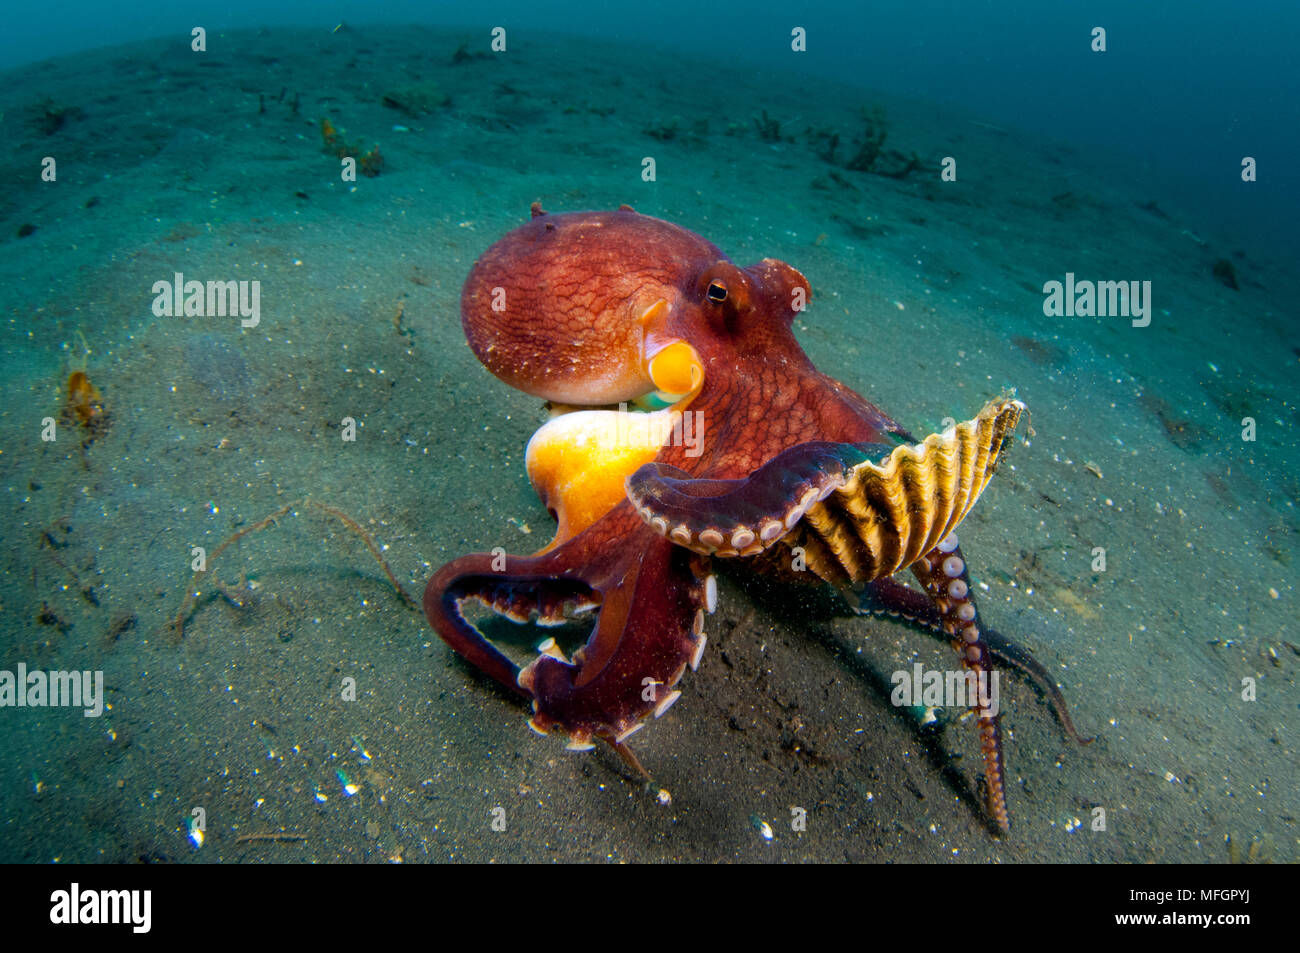 A Coconut Octopus (Amphioctopus marginatus), a species that gathers coconut and mollusc shells for shelter, Lembeh Strait, Sulawesi, Indonesia Stock Photo